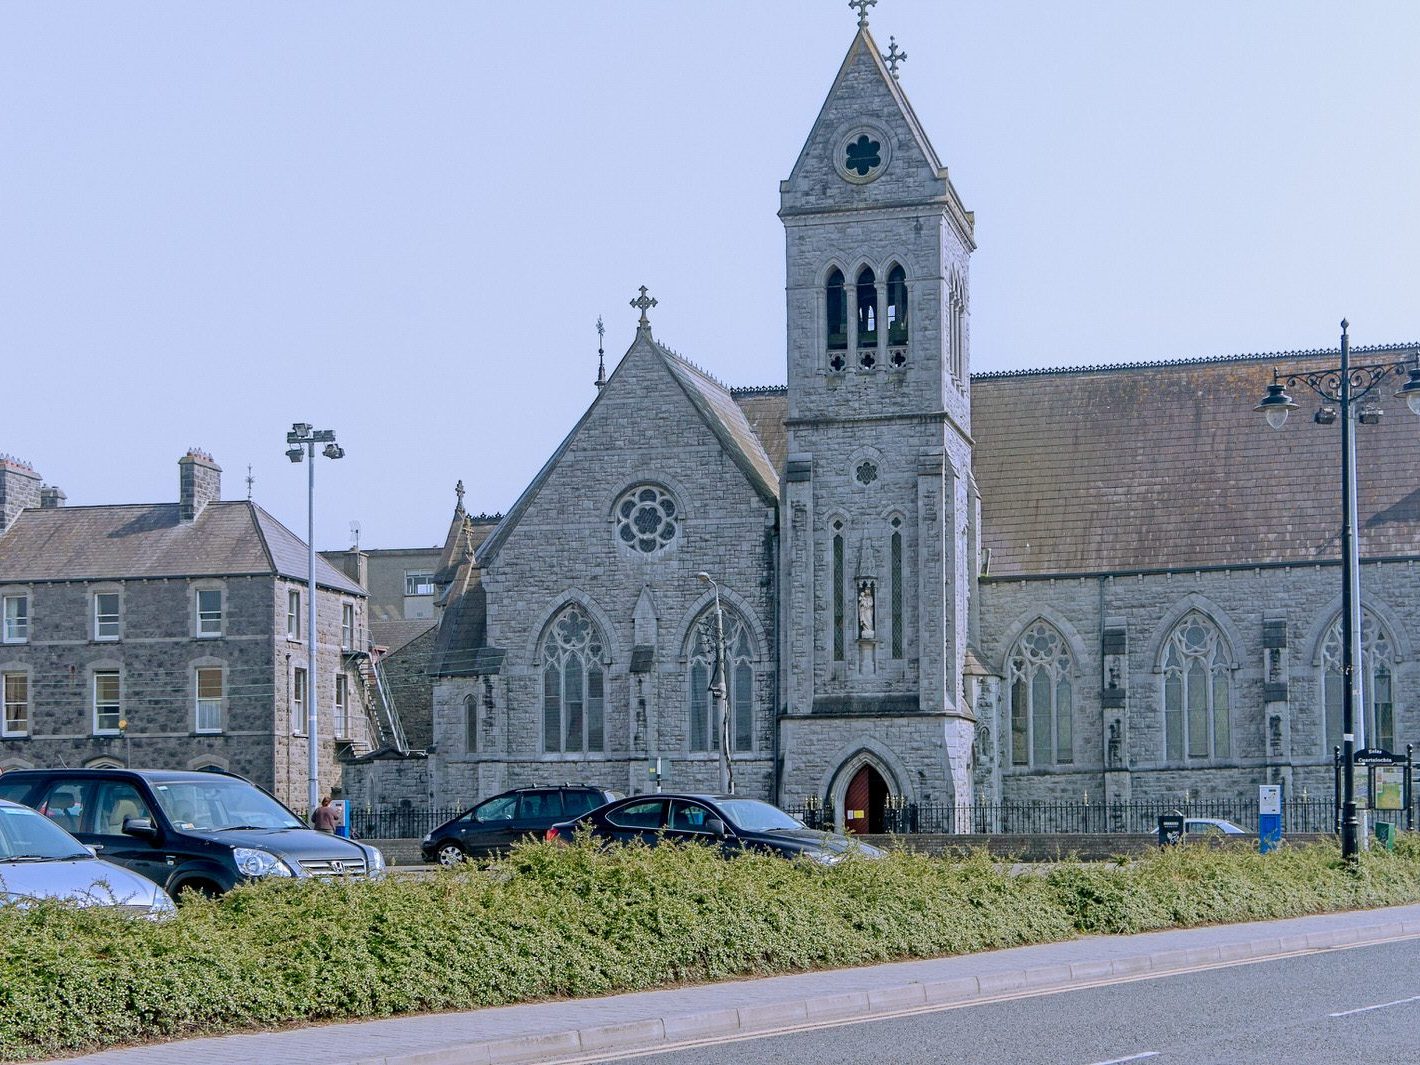 ST MARY MAGDALEN'S ROMAN CATHOLIC CHURCH IN DROGHEDA [PHOTOGRAPHED 18 APRIL 2011 BEFORE CHURCH BECAME INACTIVE] 001